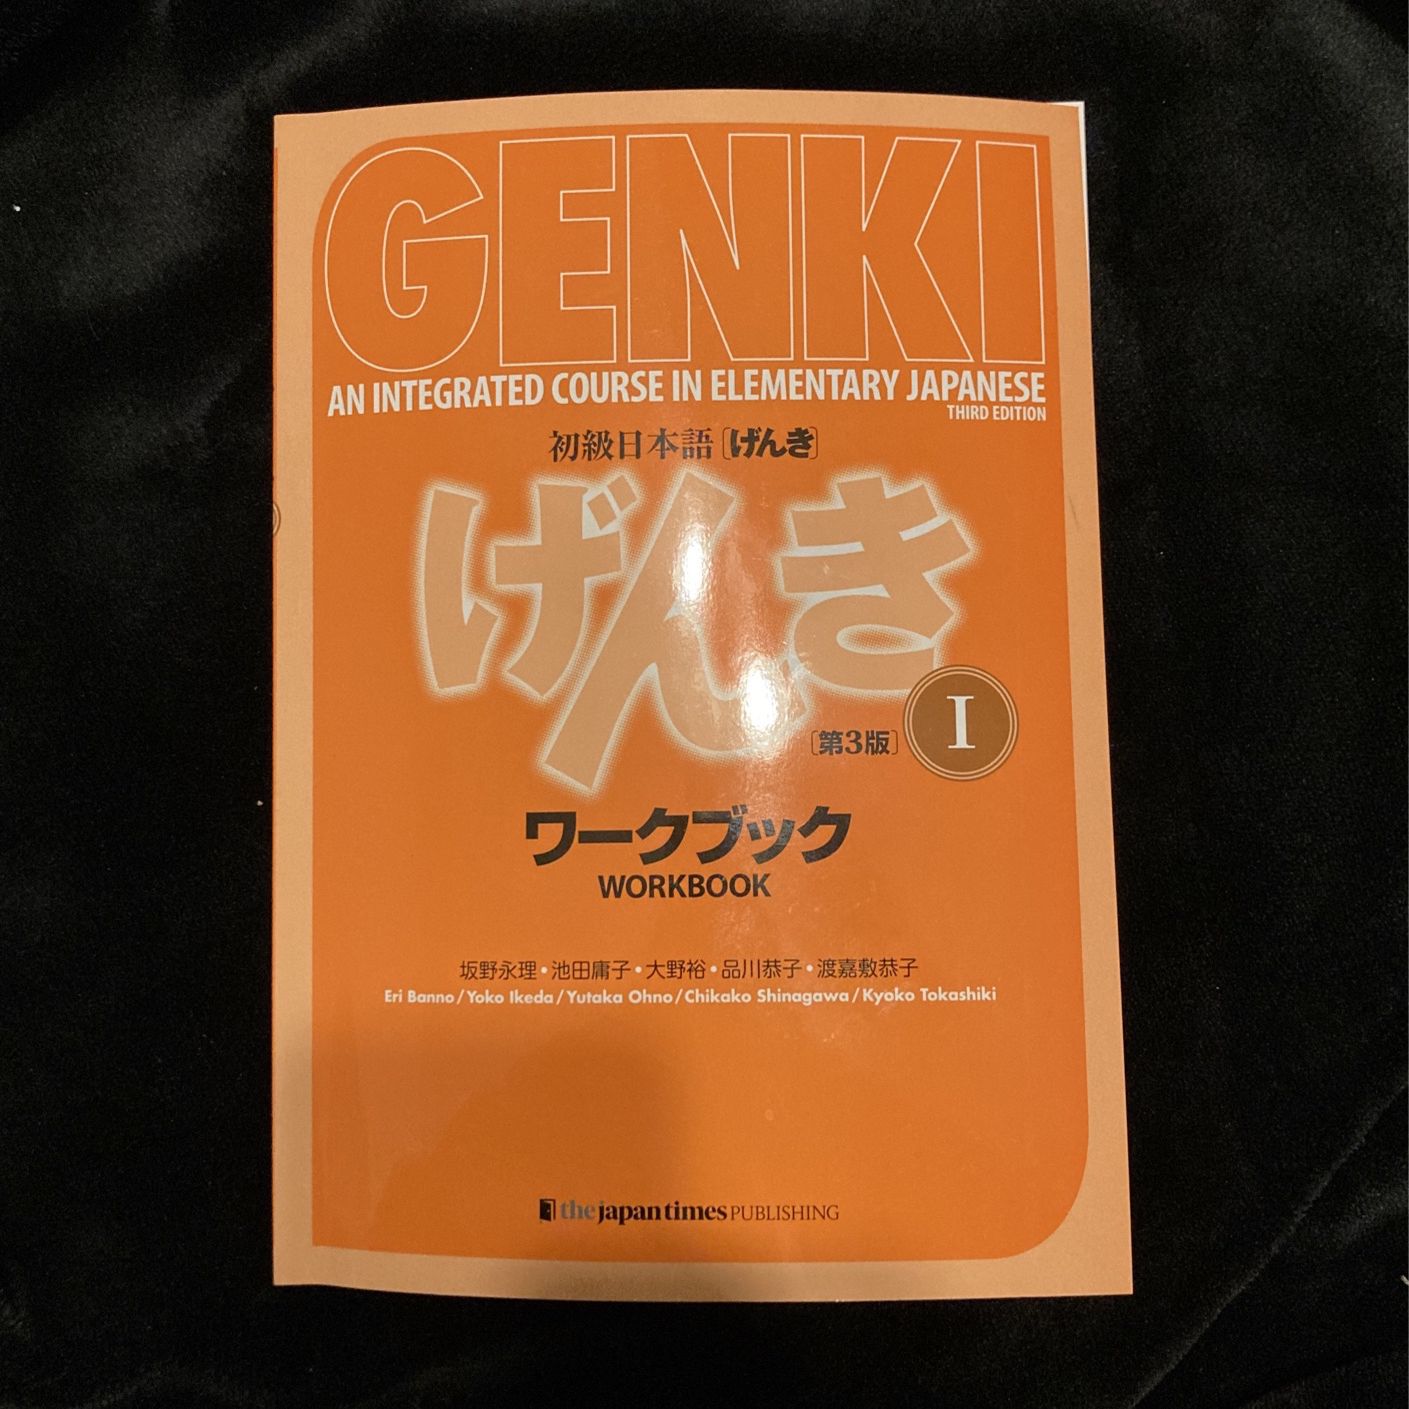 Genki　San　Sale　CA　An　Japanese　Elementary　Integrated　In　for　Bernardino,　in　Course　3rd　Workbook　Edition　OfferUp